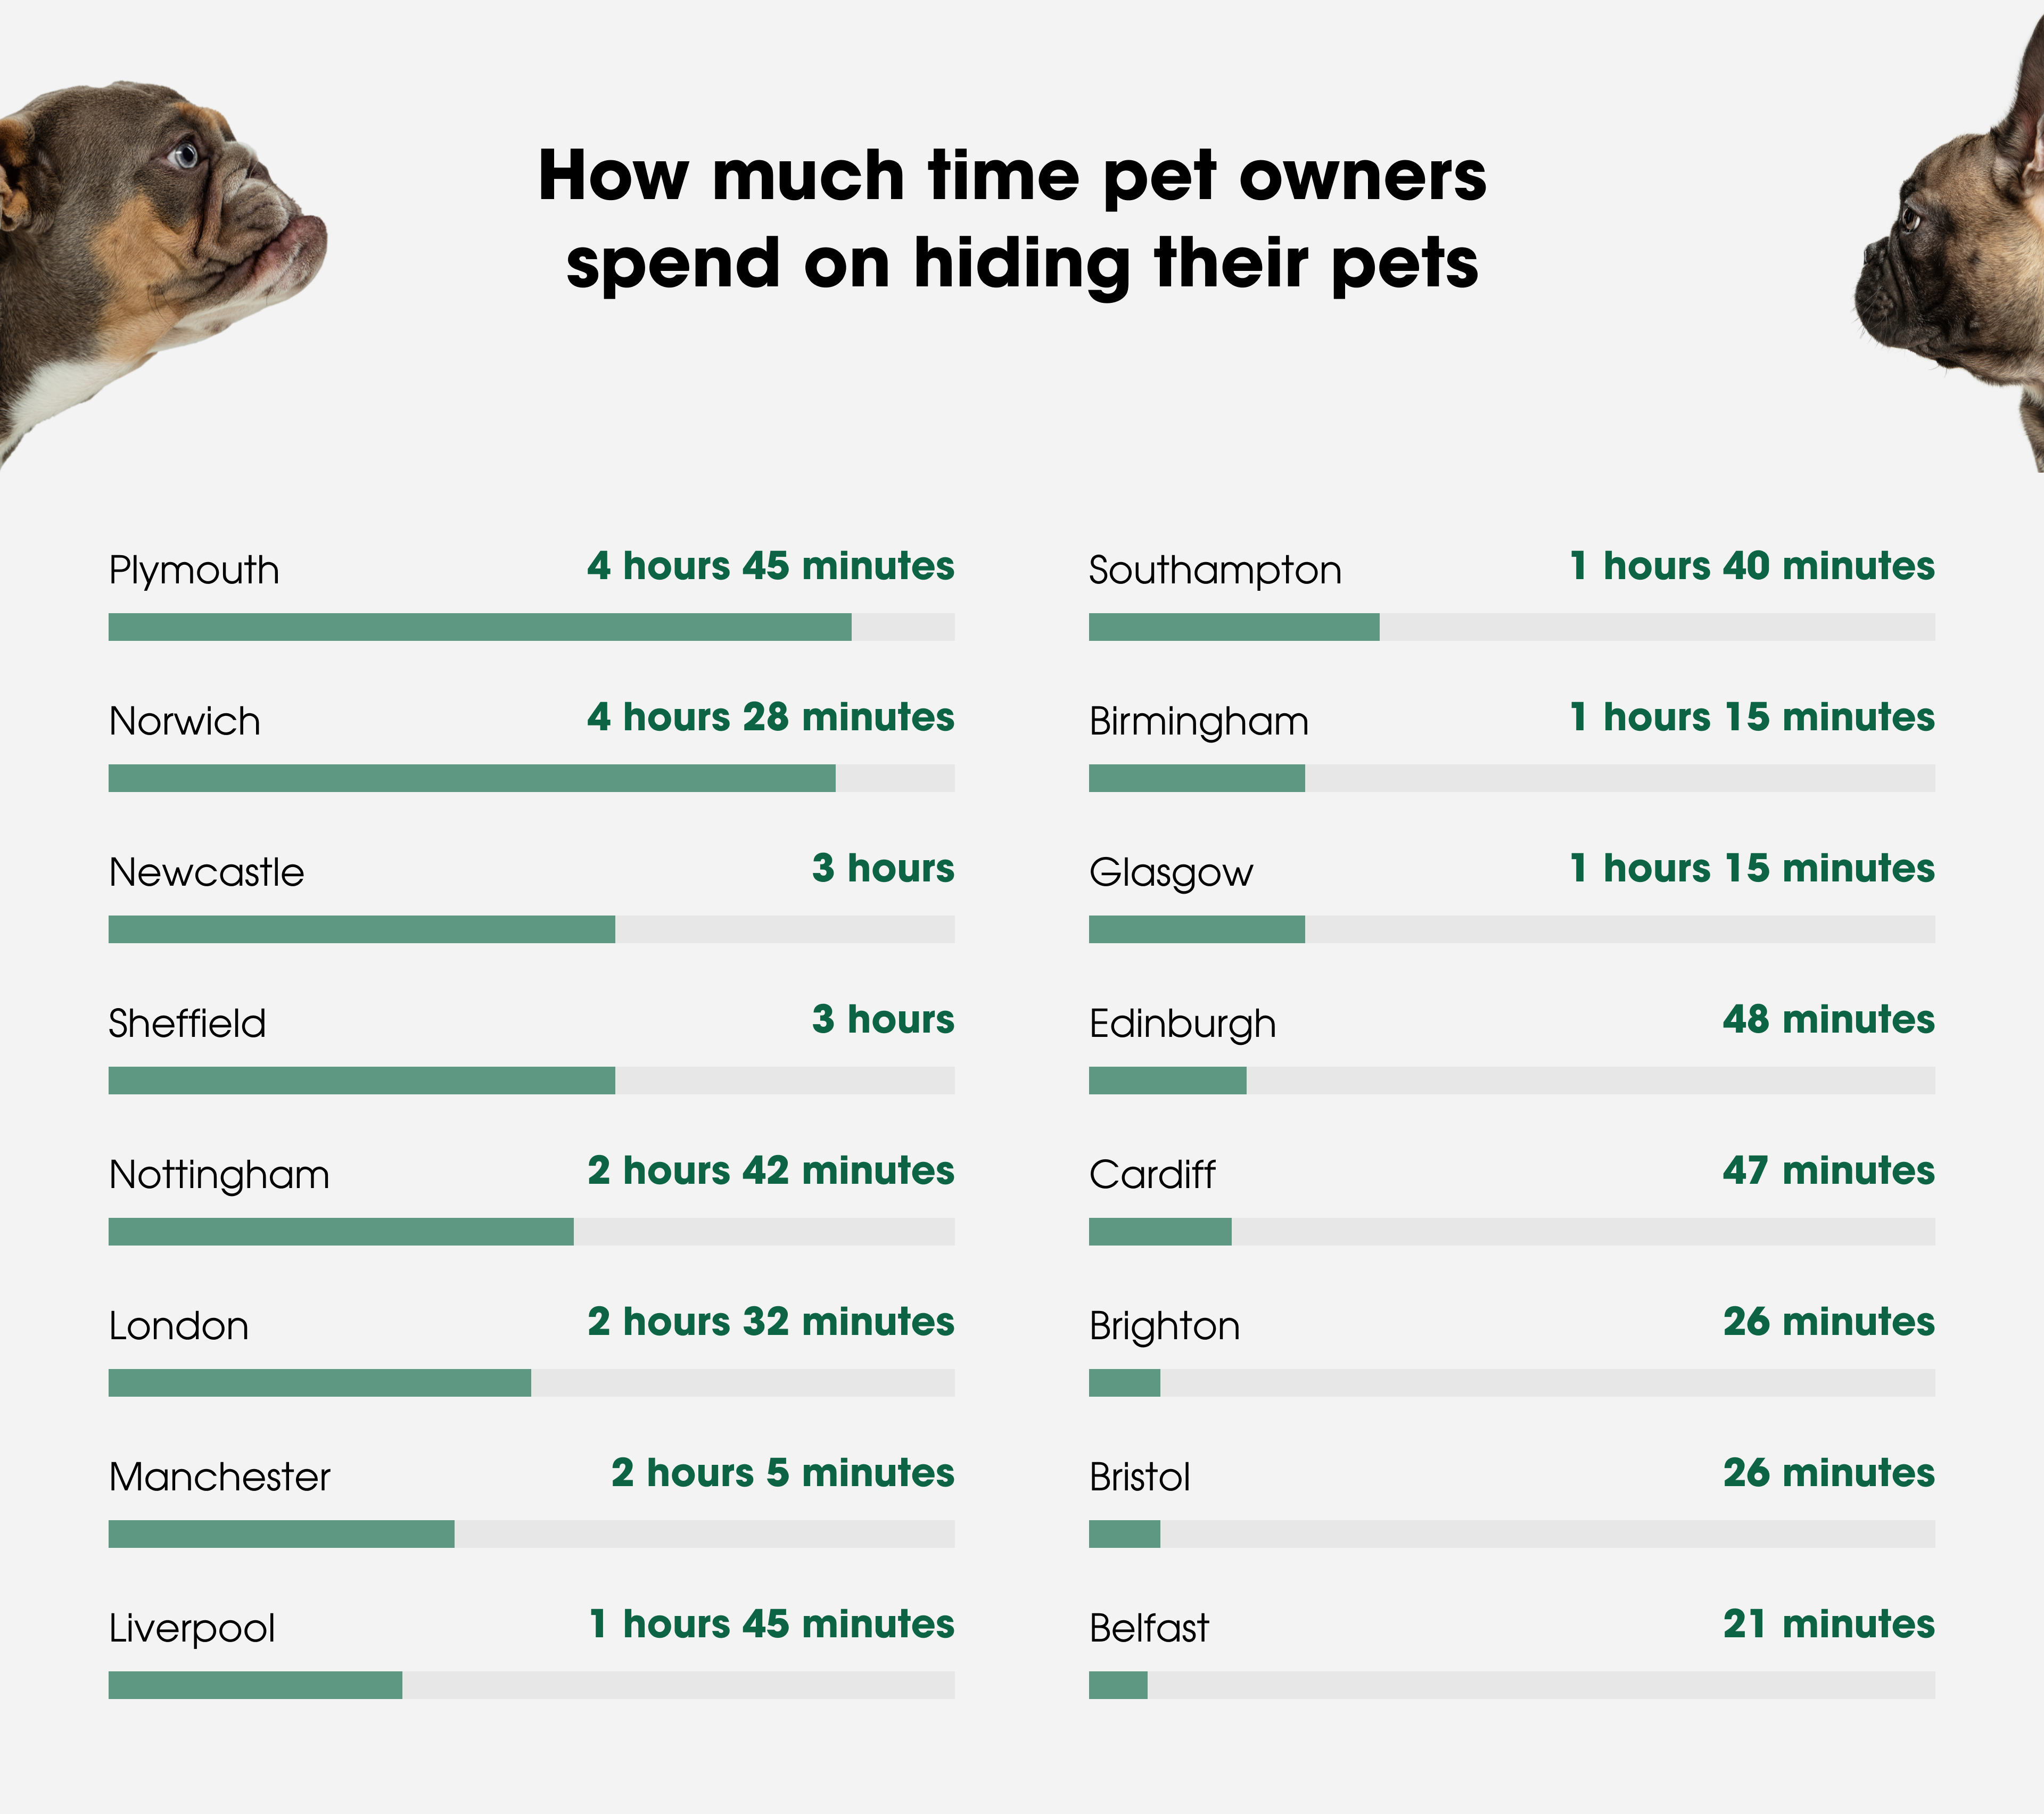 How much time pet owners spend on hiding their pets